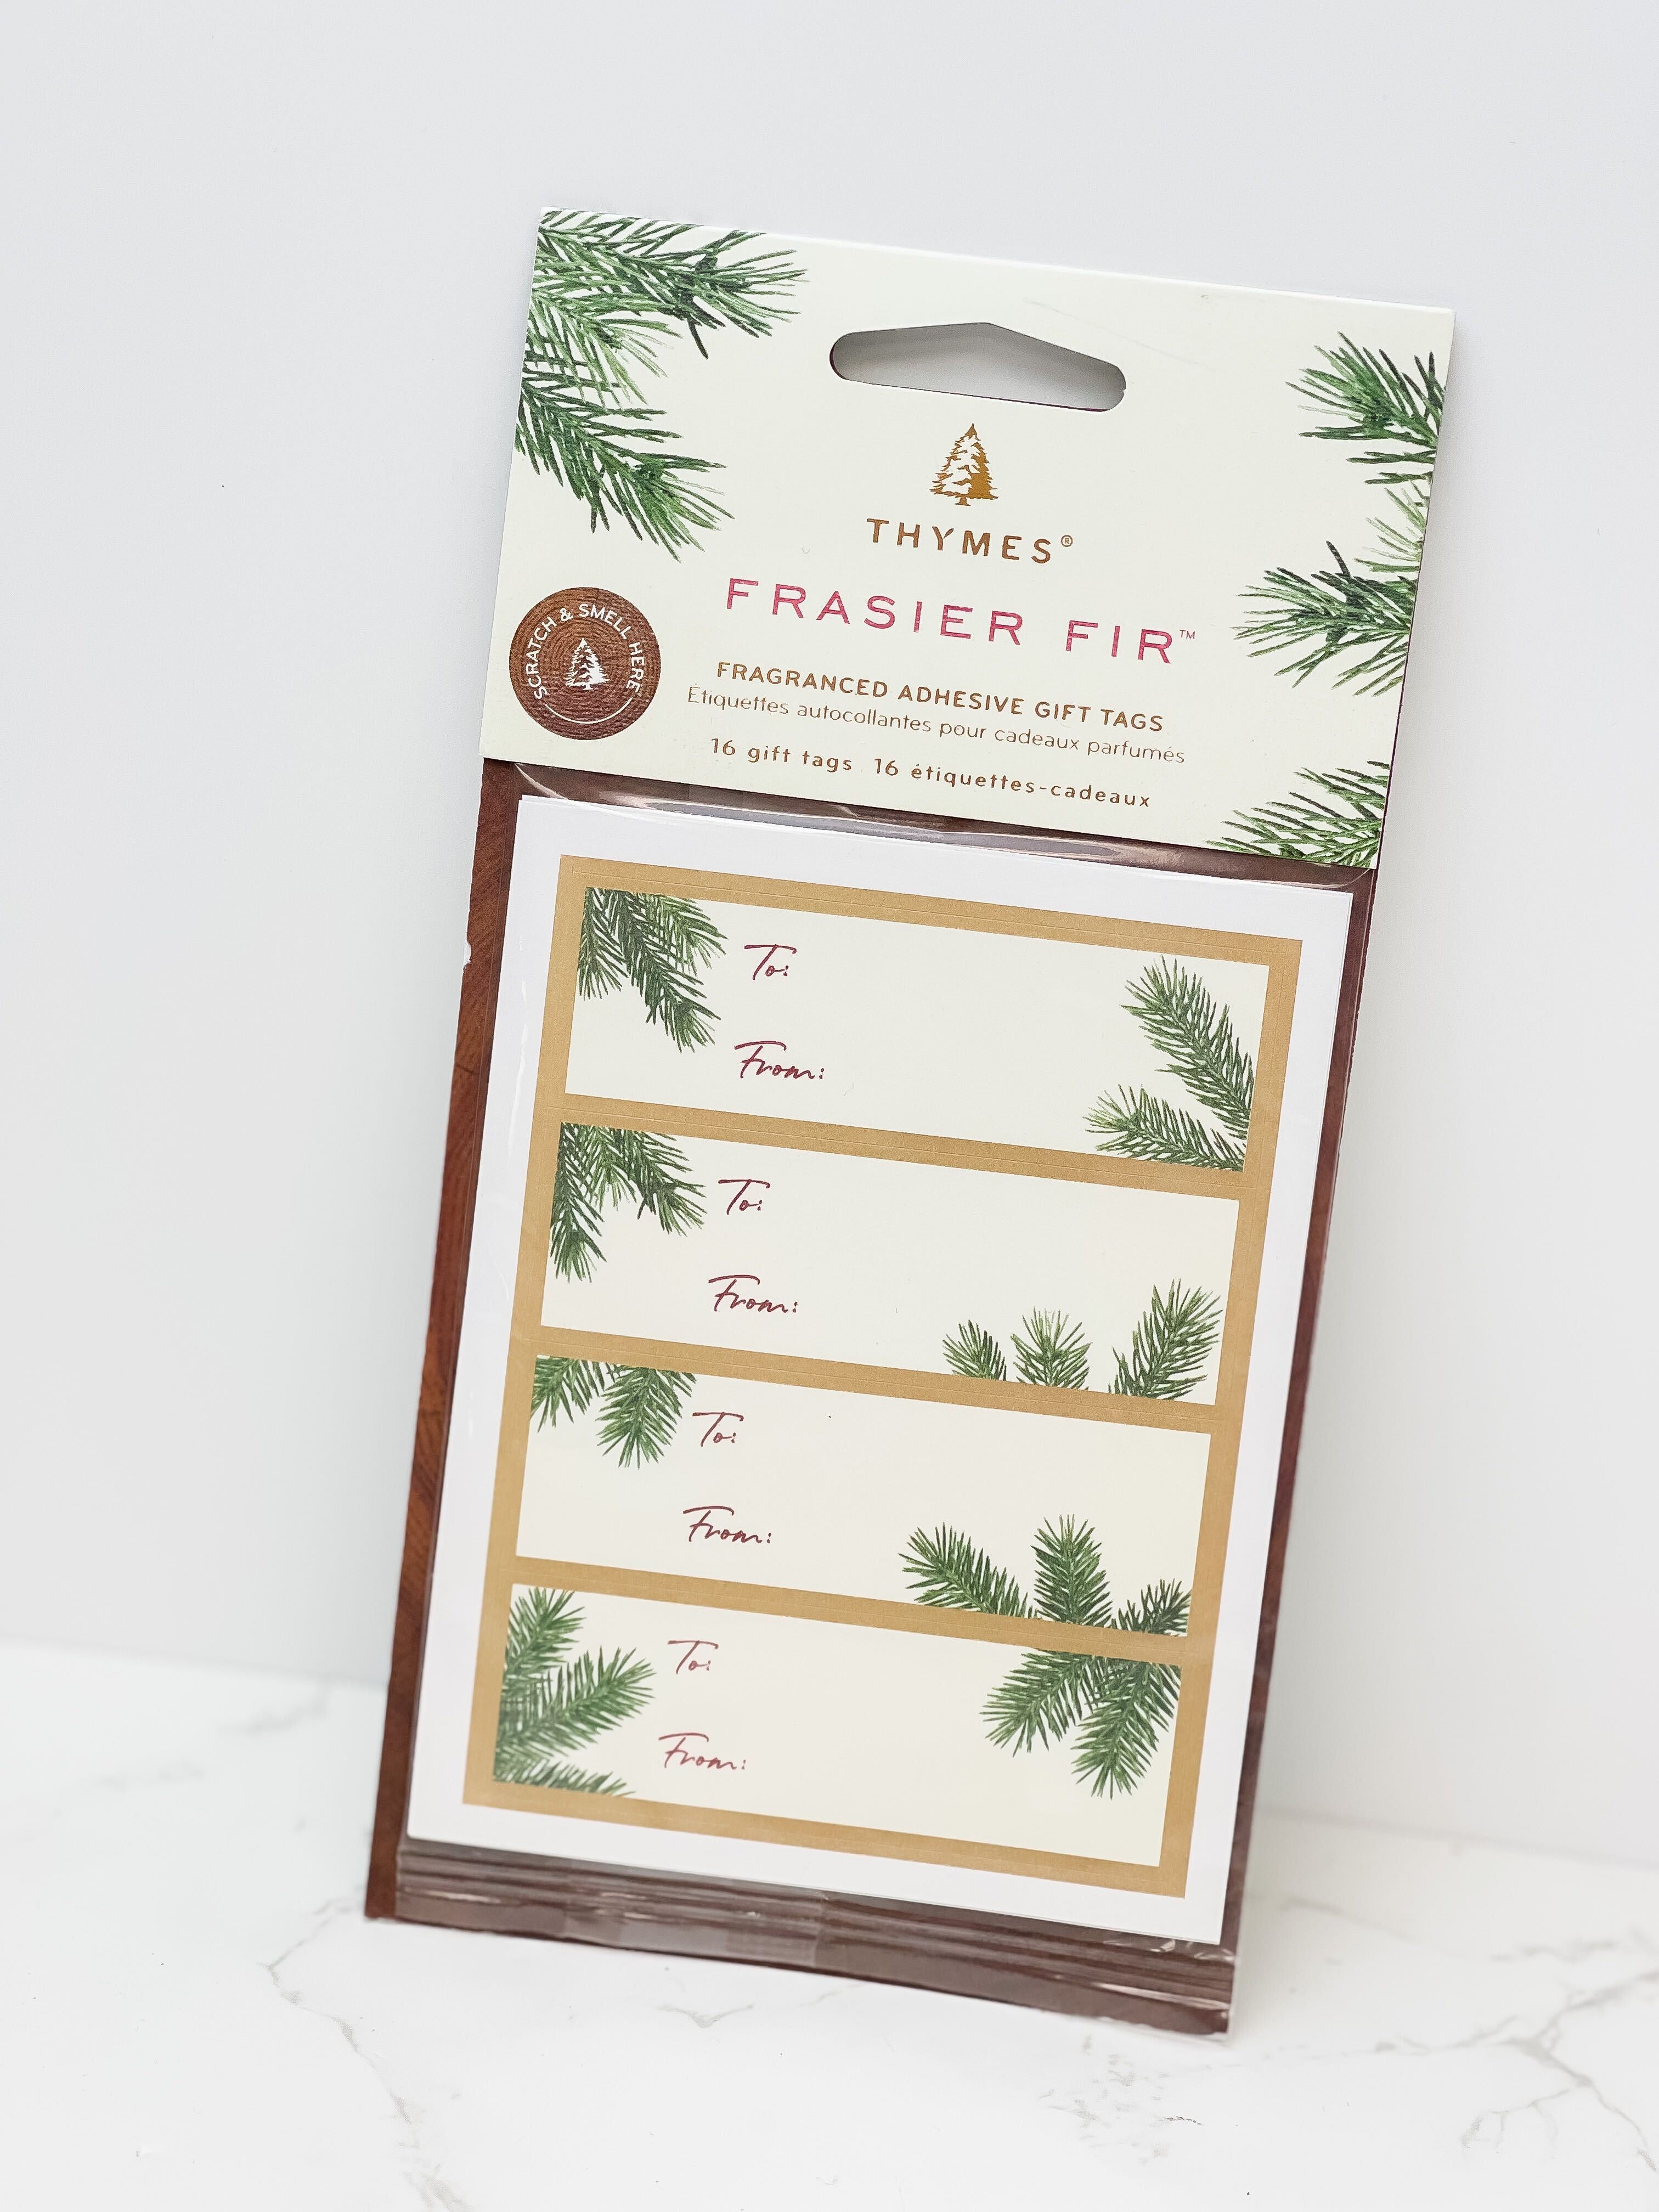 Frasier Fir Fragranced Adhesive Gift Tags by Thymes